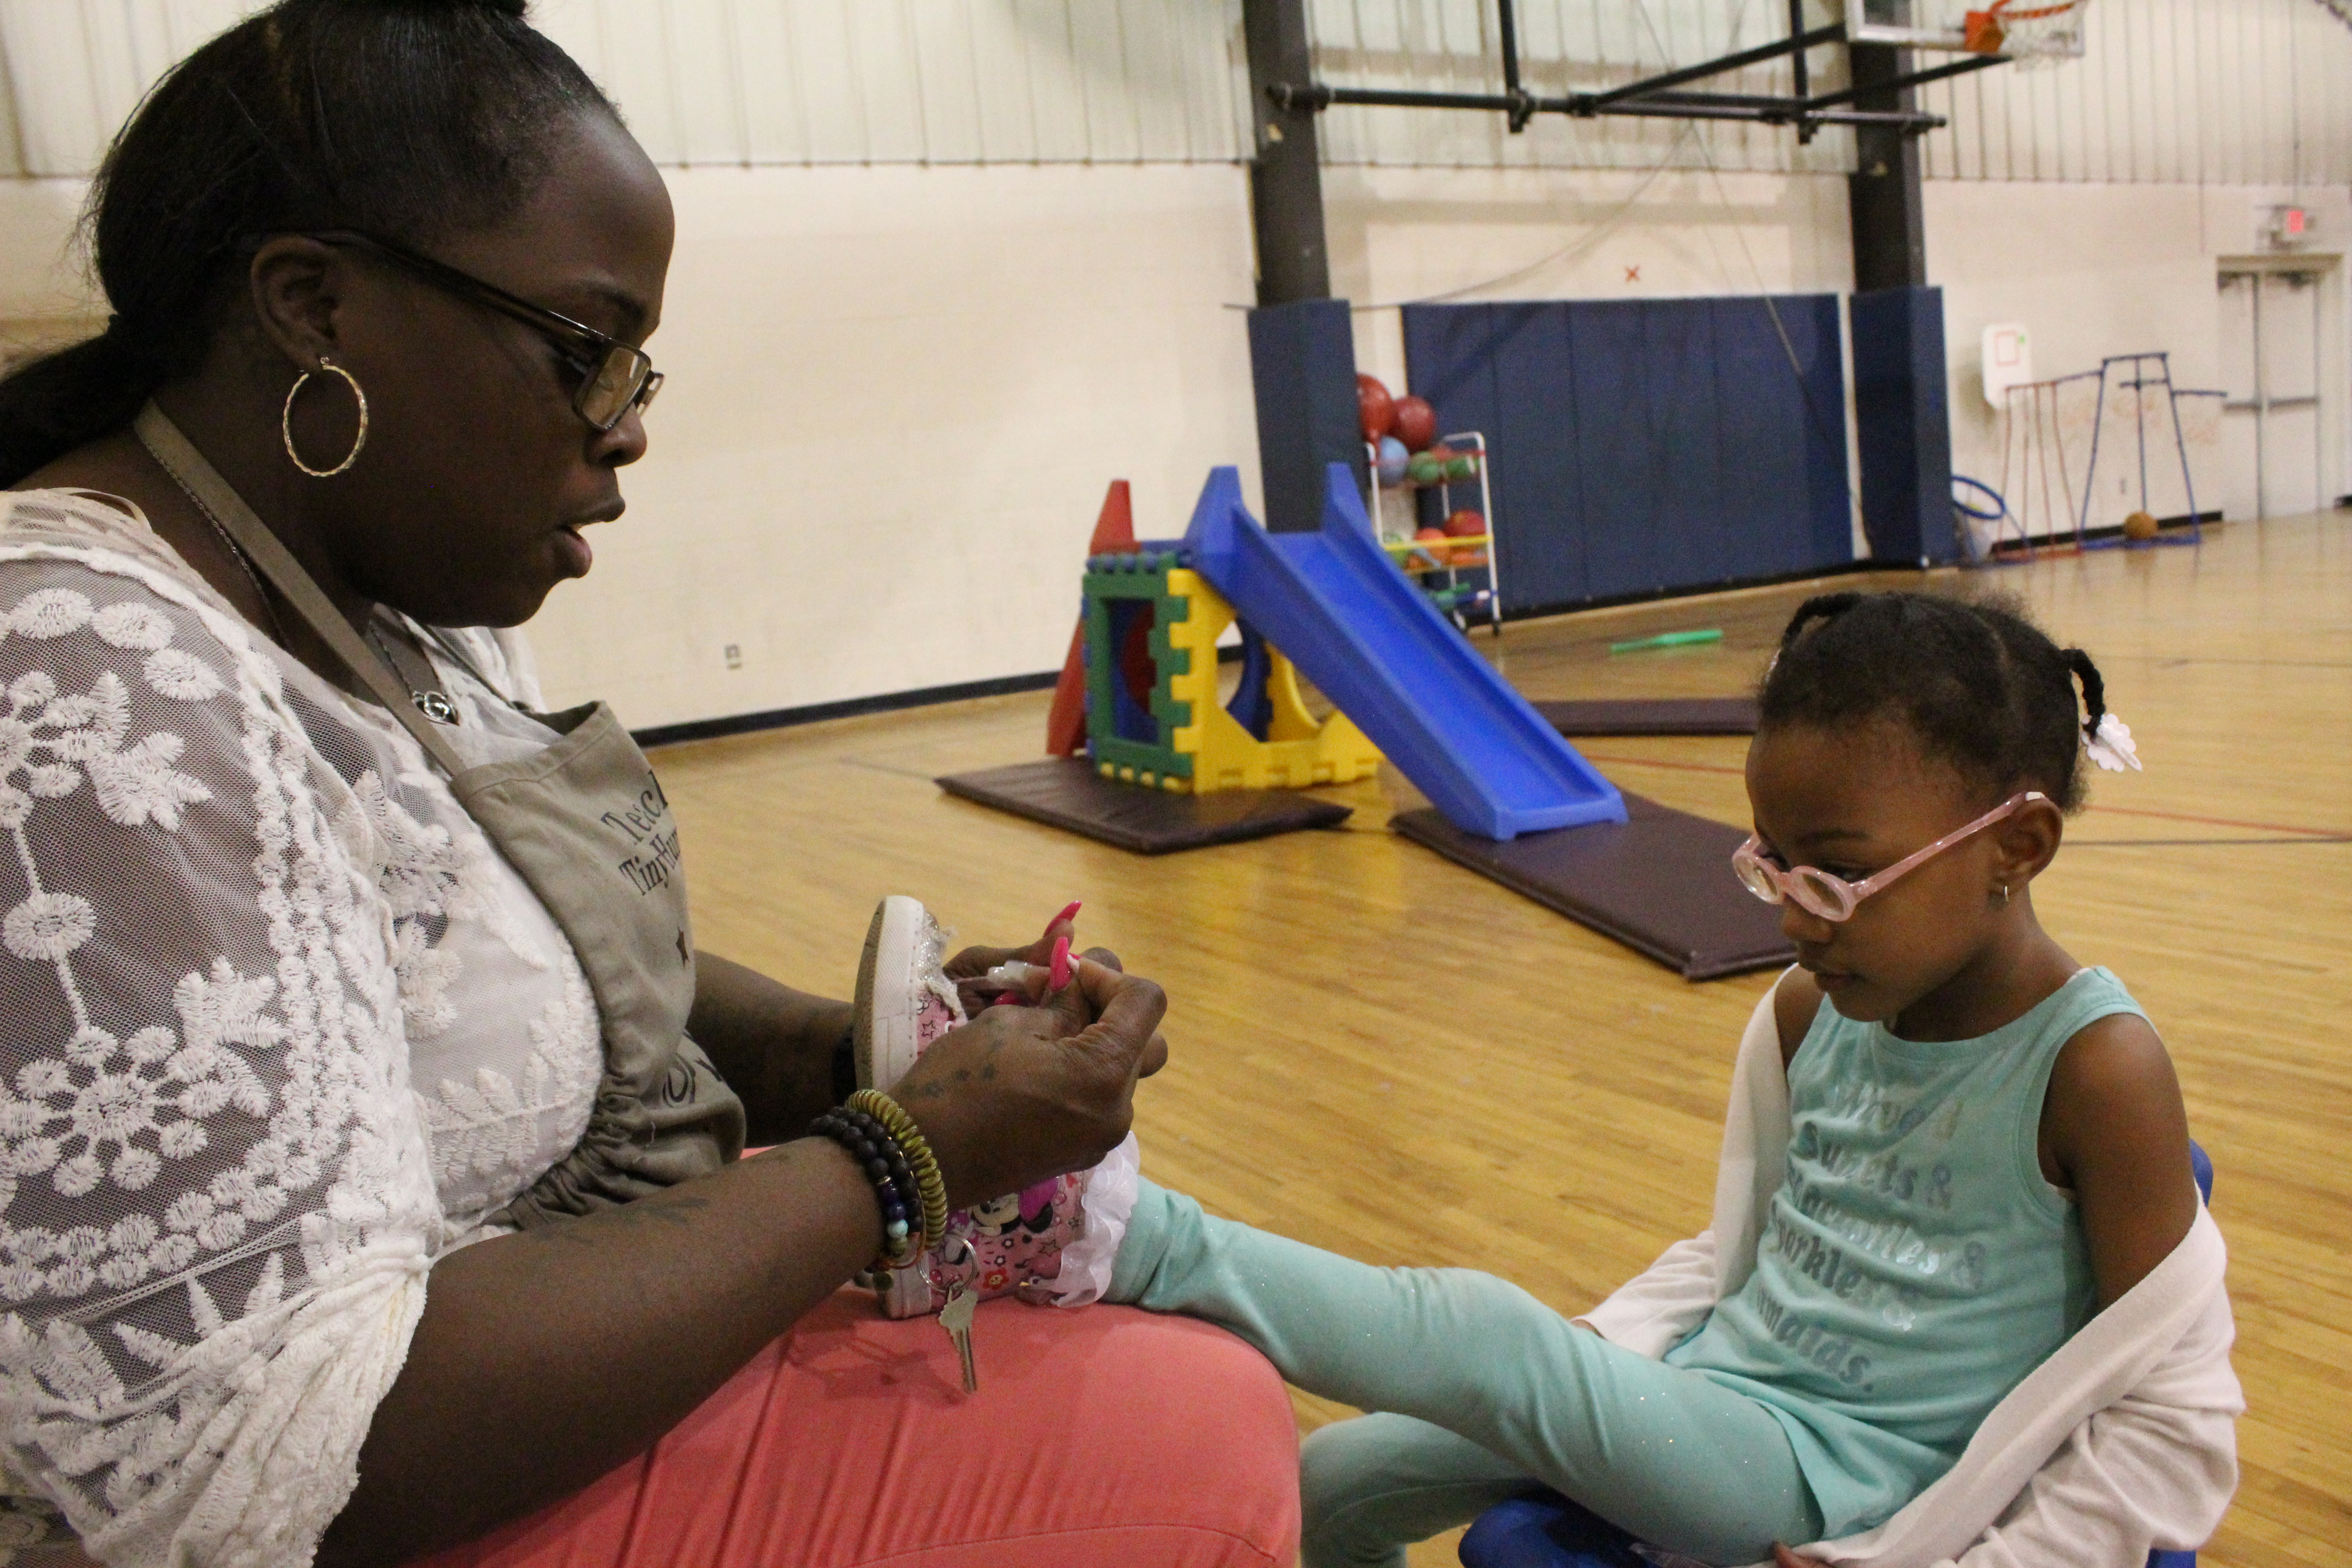 Cindy Lester, ties a shoelace during gym class at Children of the Rising Sun Empowerment Center in northwest Detroit.